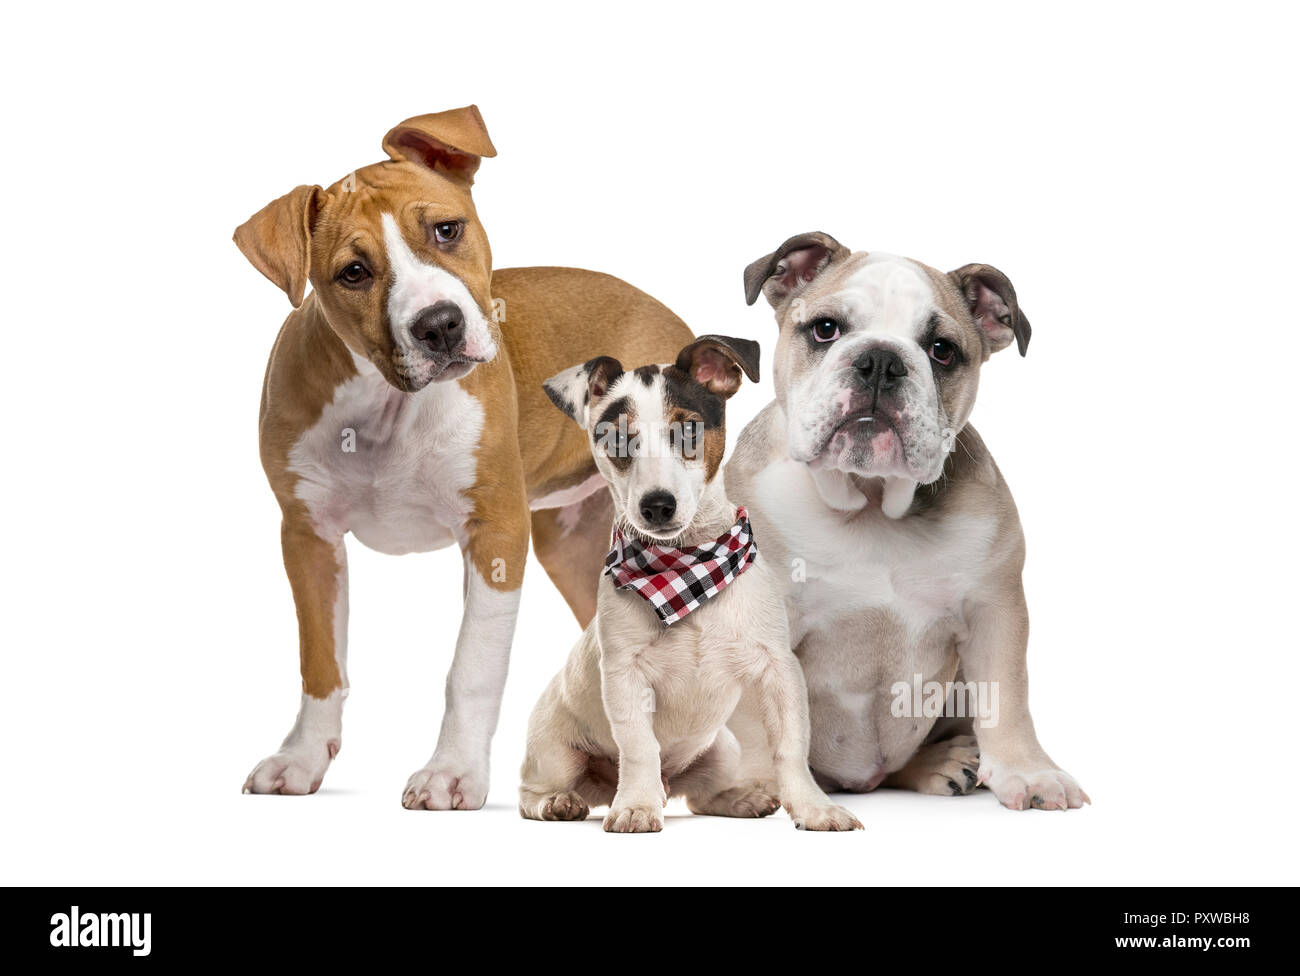 American Staffordshire Terrier Puppy English Bulldog Puppy Jack Russell Terrier Puppy With Checked Scarf In Front Of White Background Stock Photo Alamy